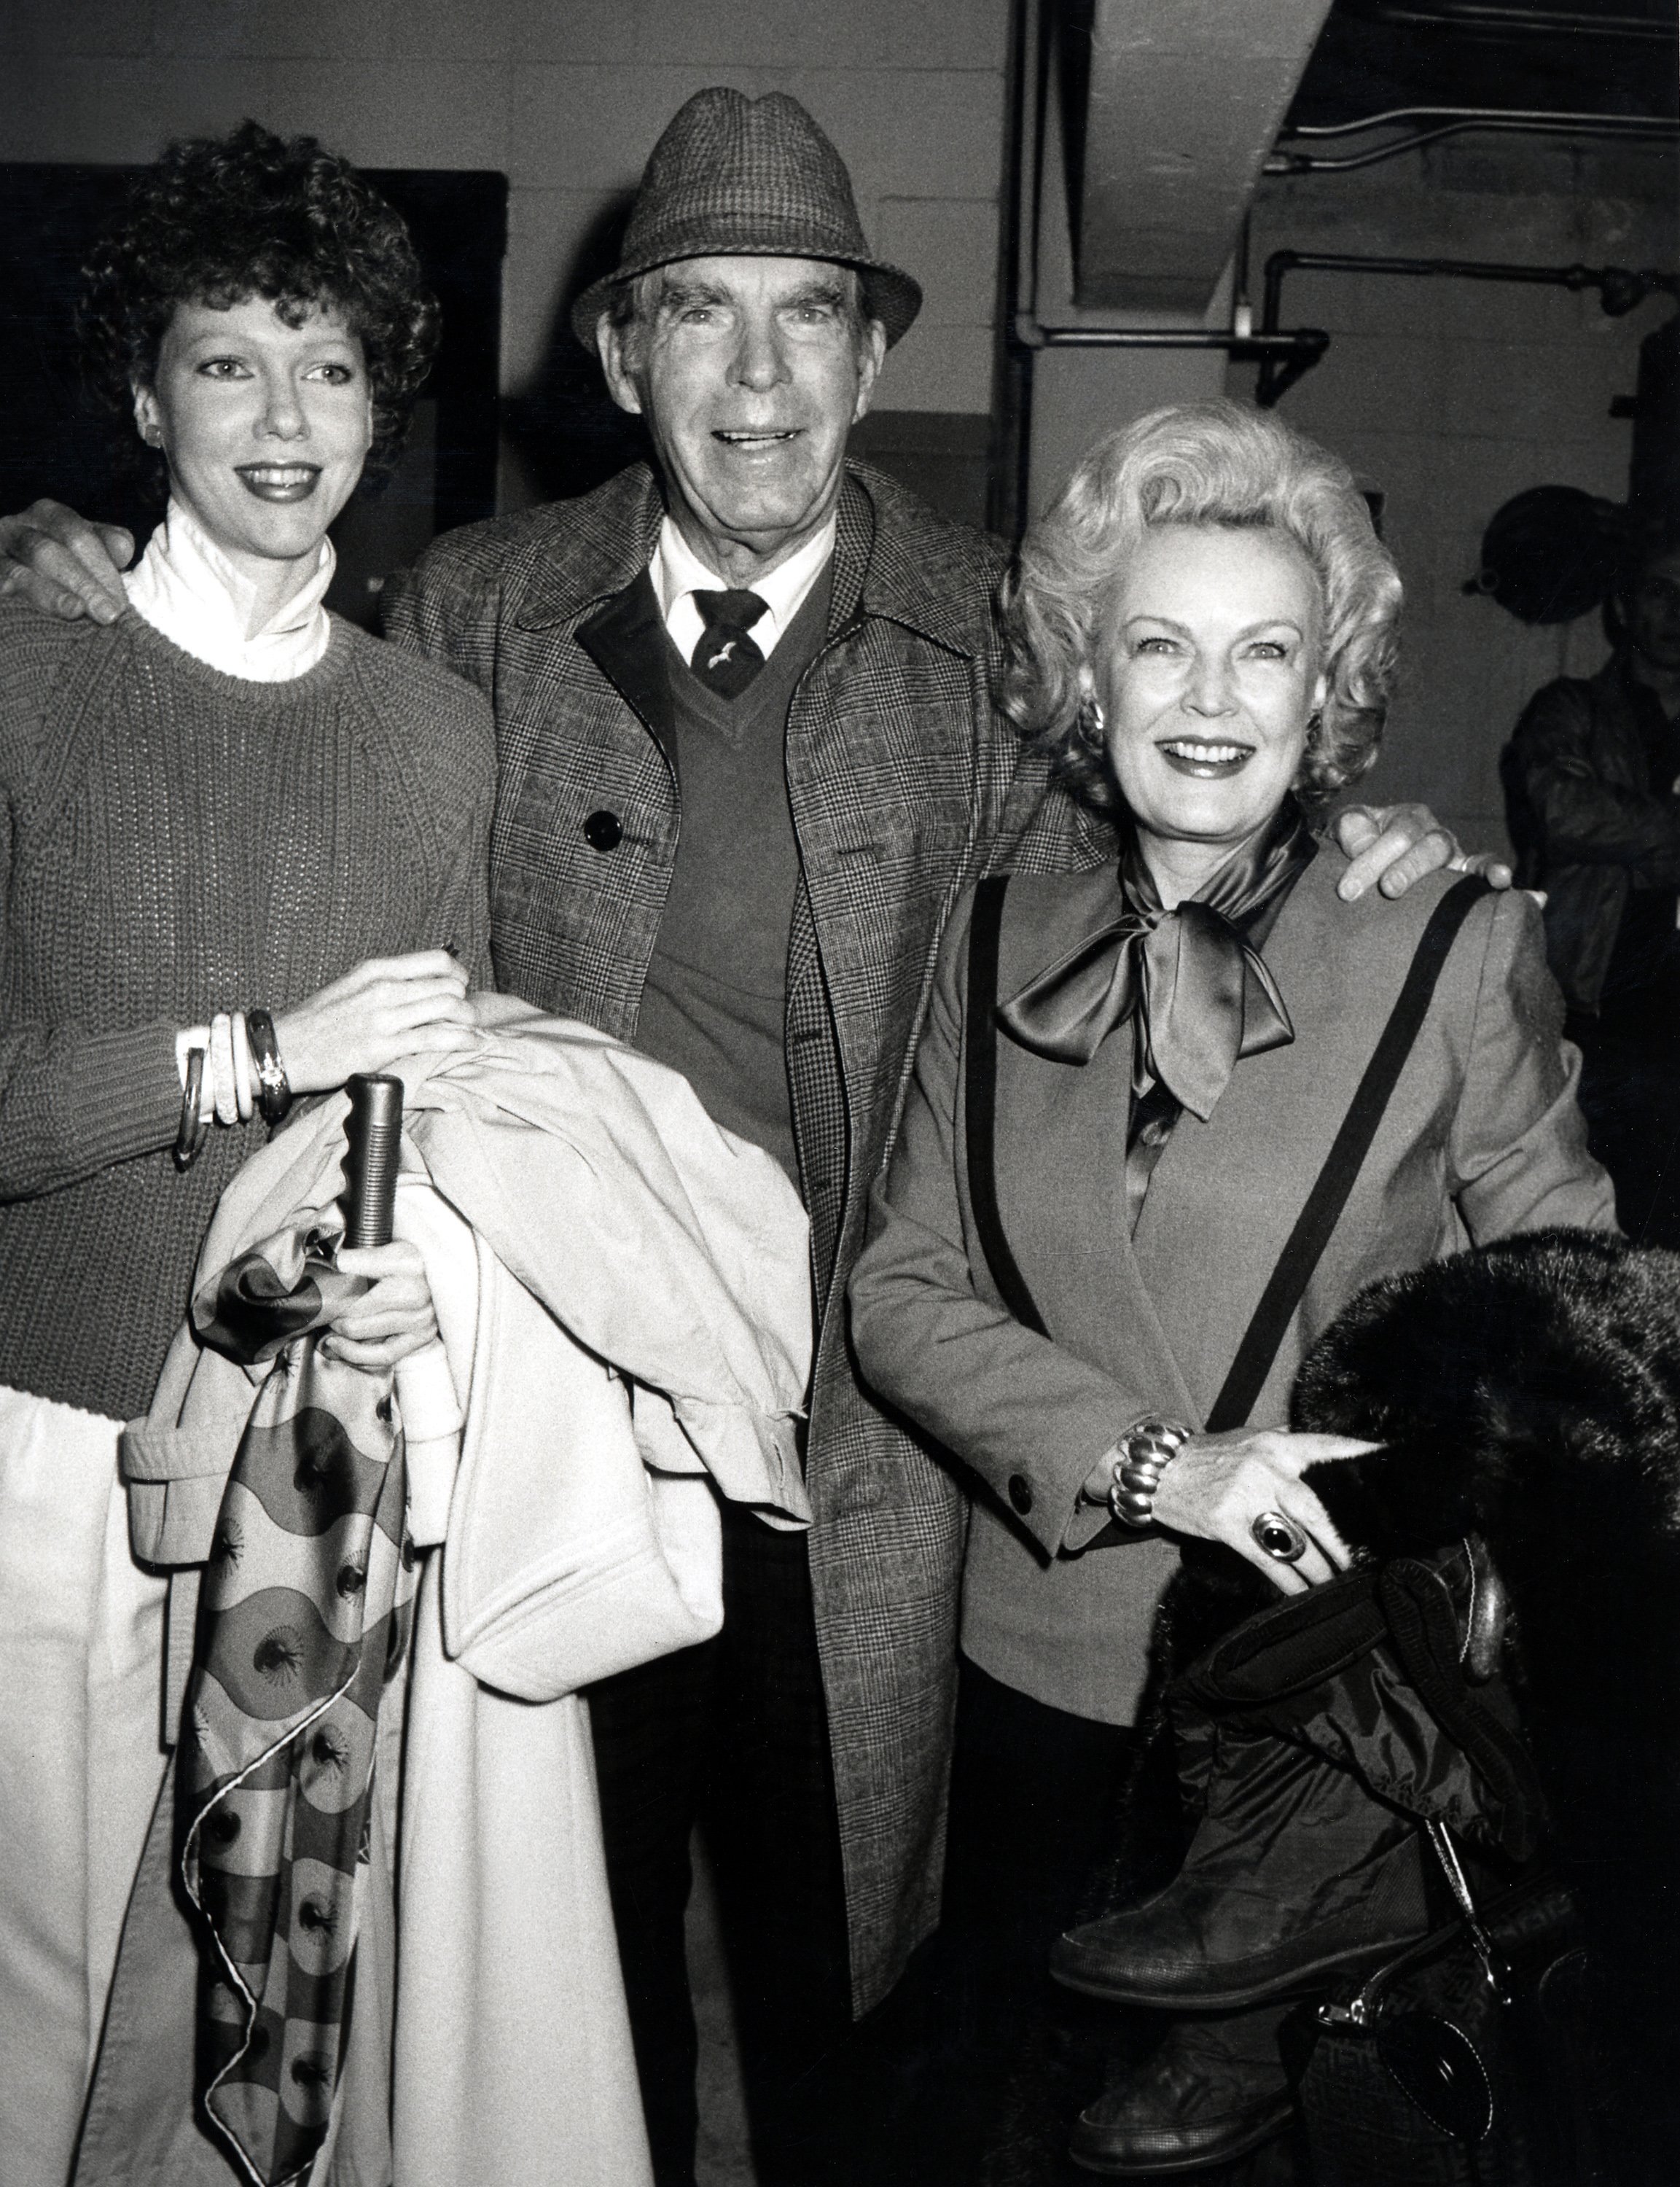 Fred MacMurray, June Haver, and their daughter during the 1986 St. Patricks Day Parade at Beverly Hills in Beverly Hills, California, United States. | Source: Getty Images